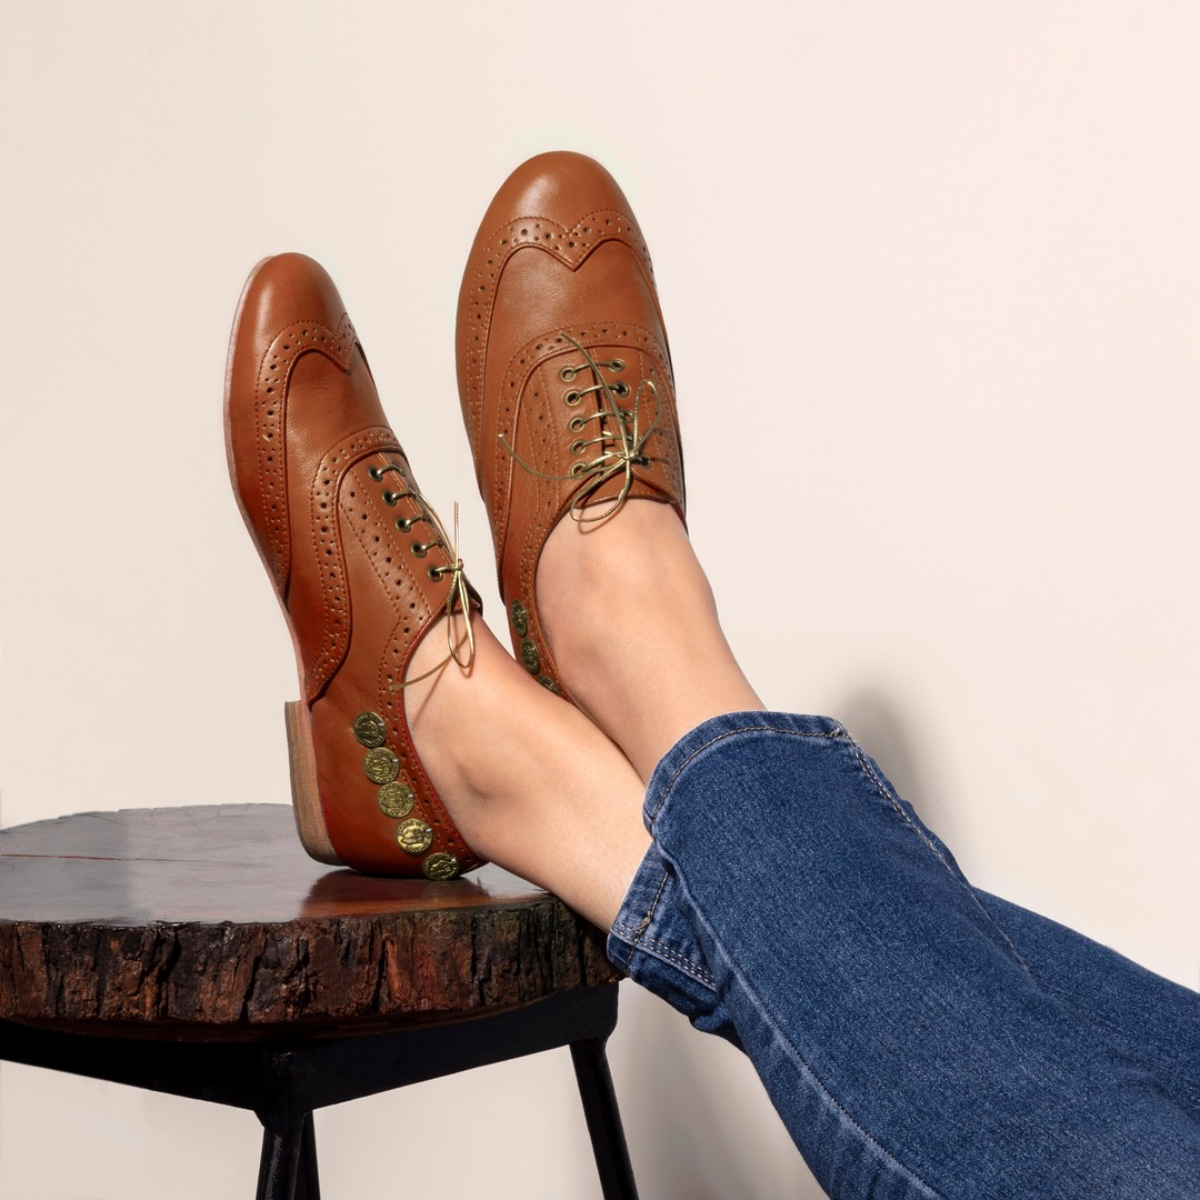 brogues shoes in brown